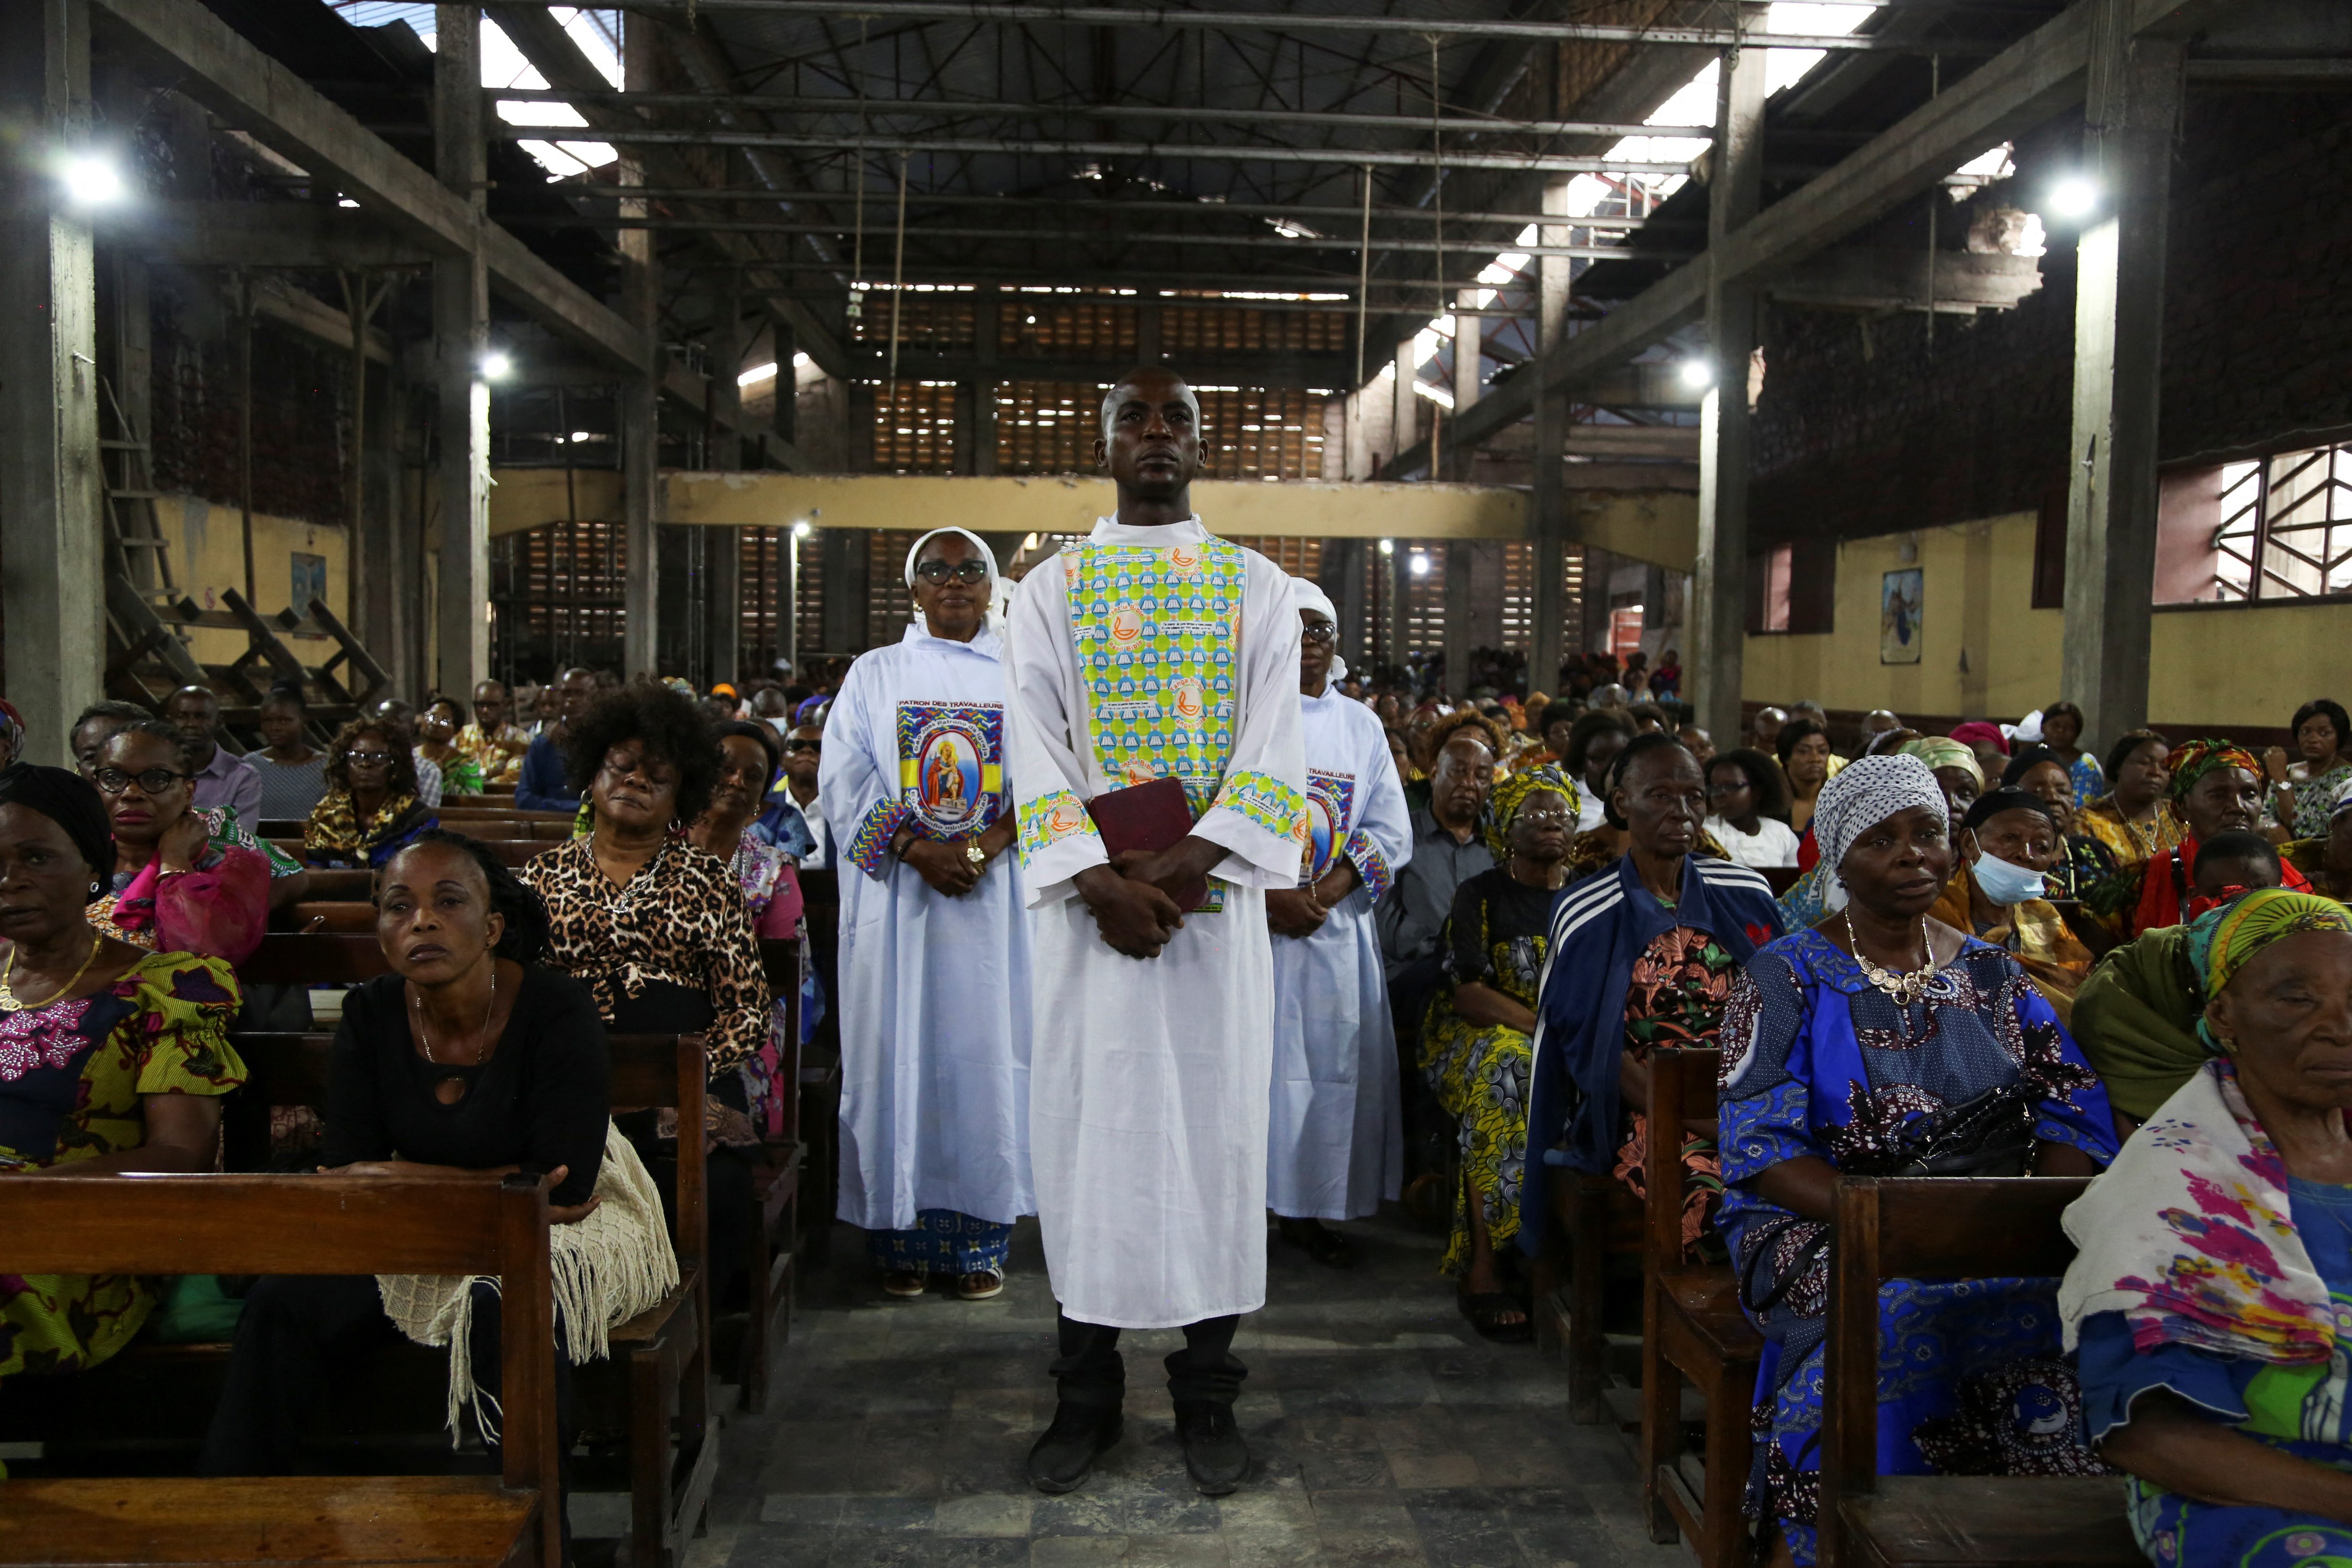 Congo's Catholic Church plays outsized role in march to democracy